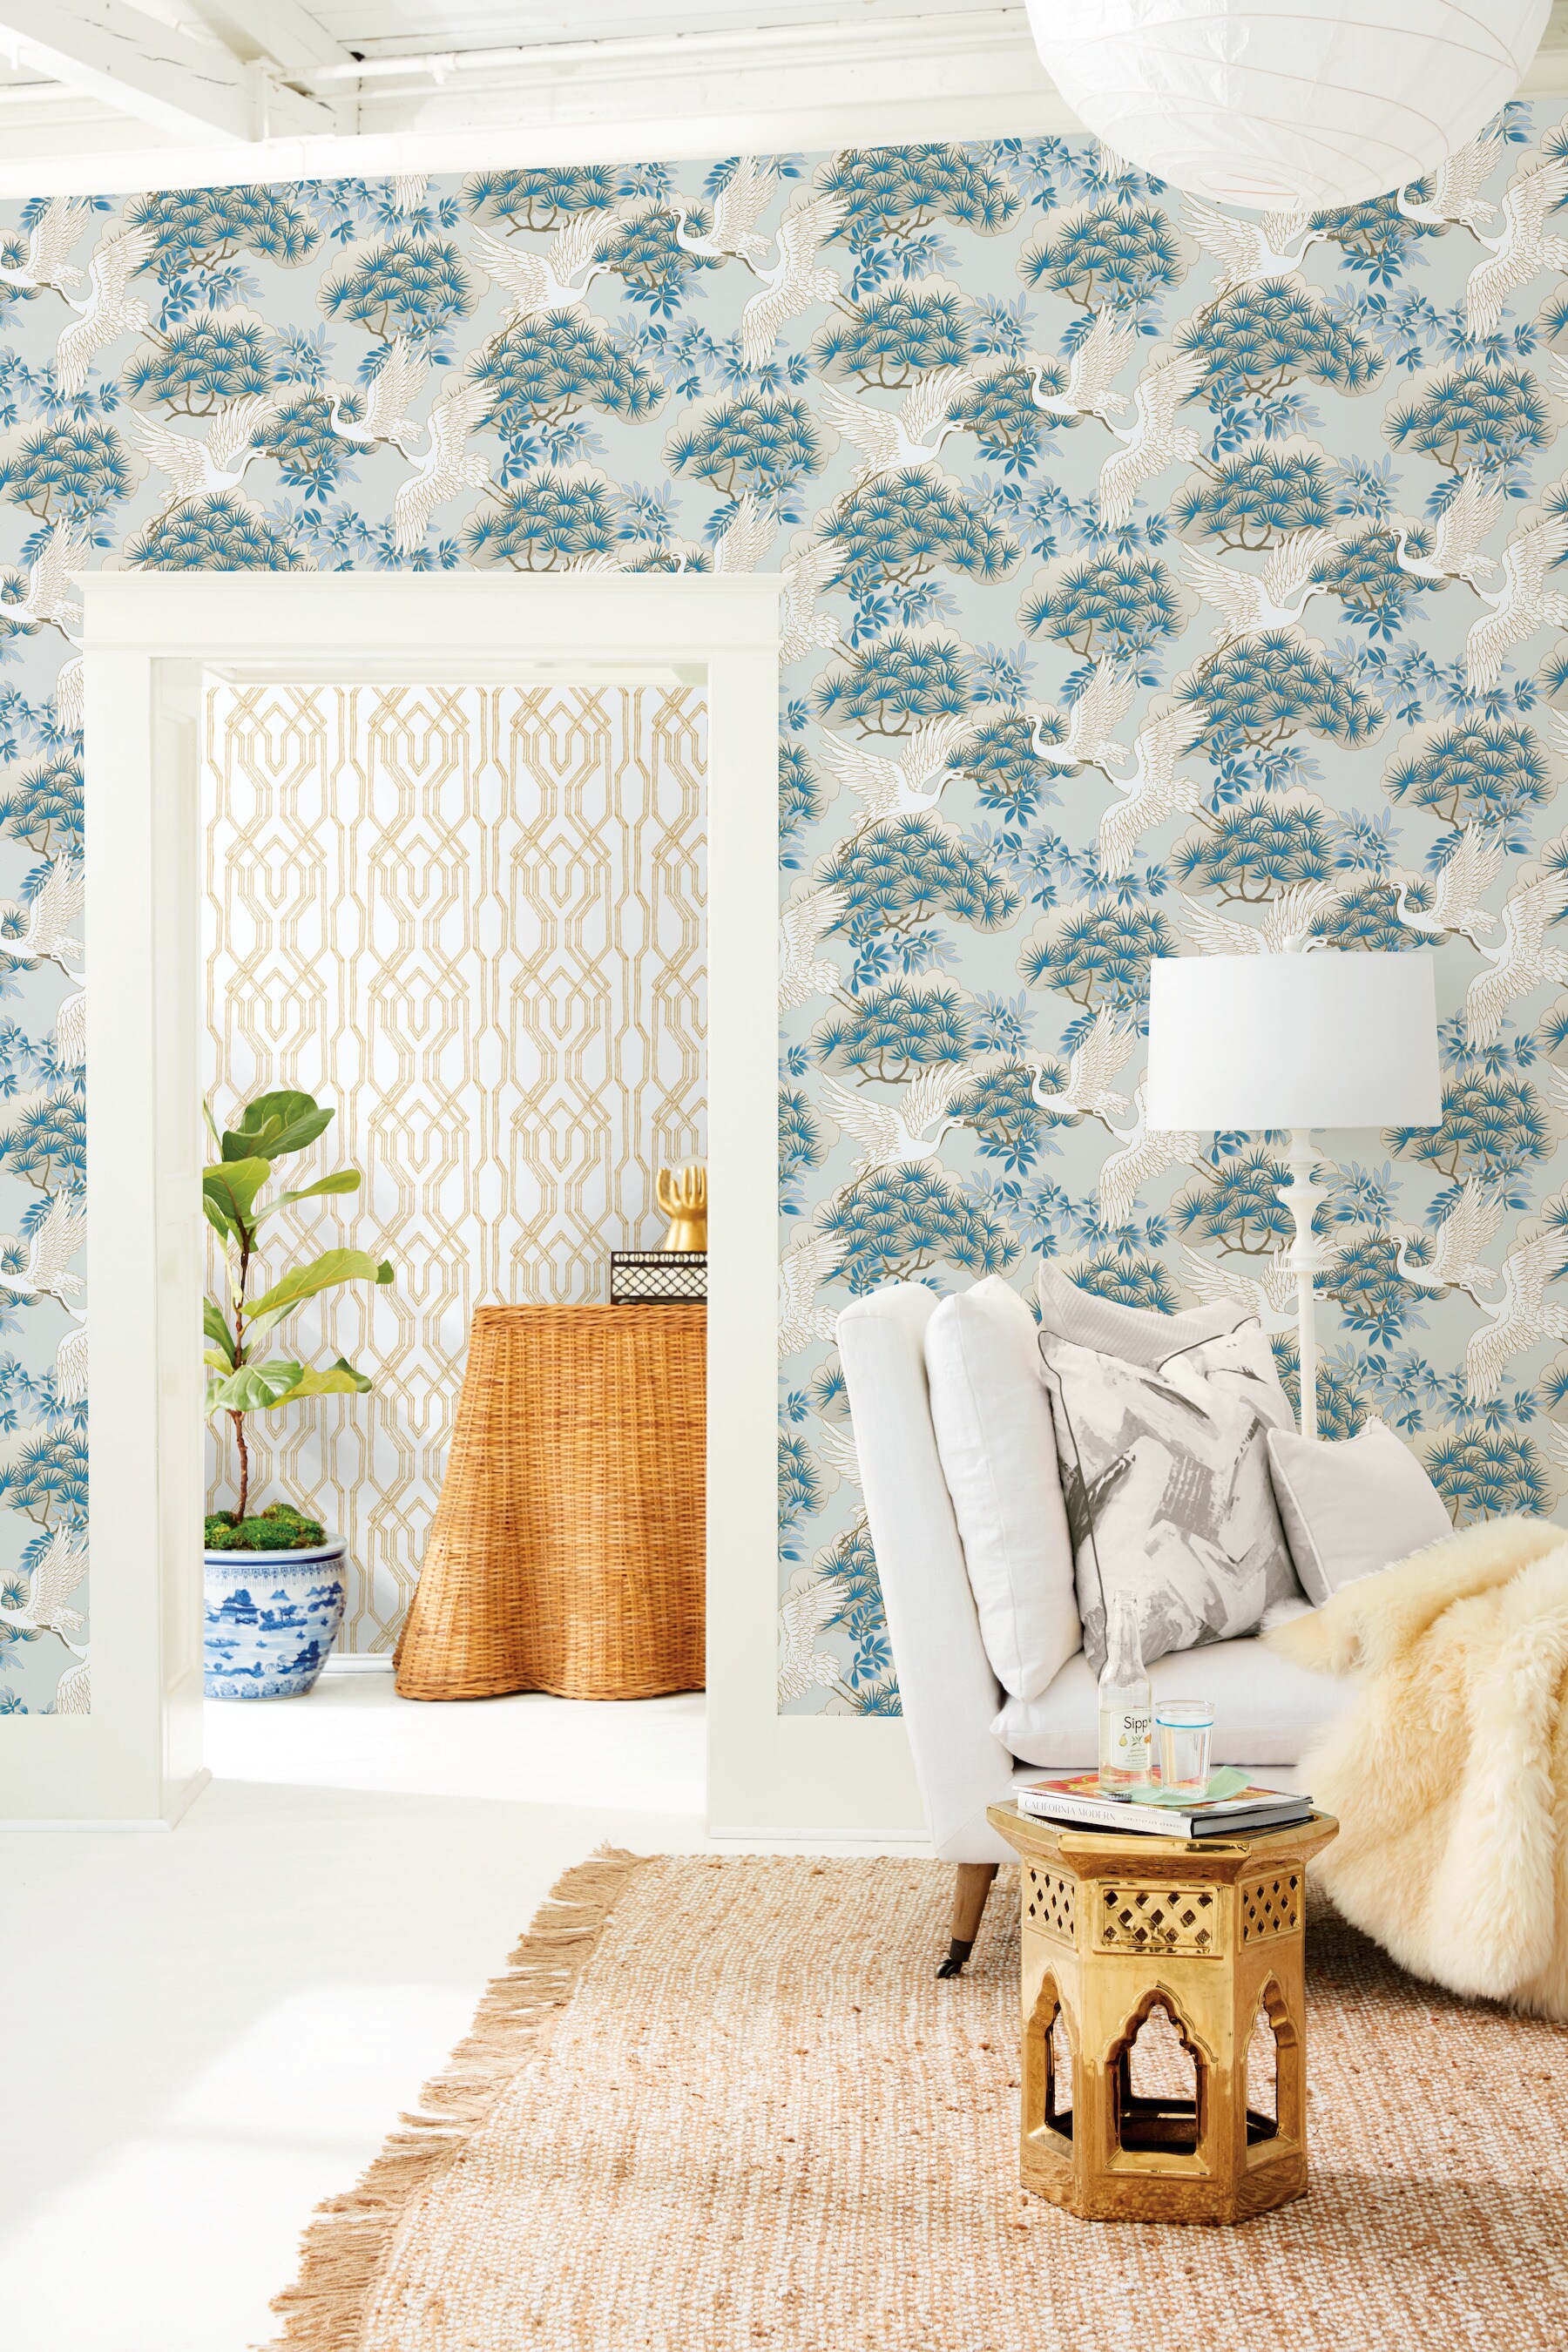 York Wallcoverings Wallpaper & Accessories Near Me at Lowes.com